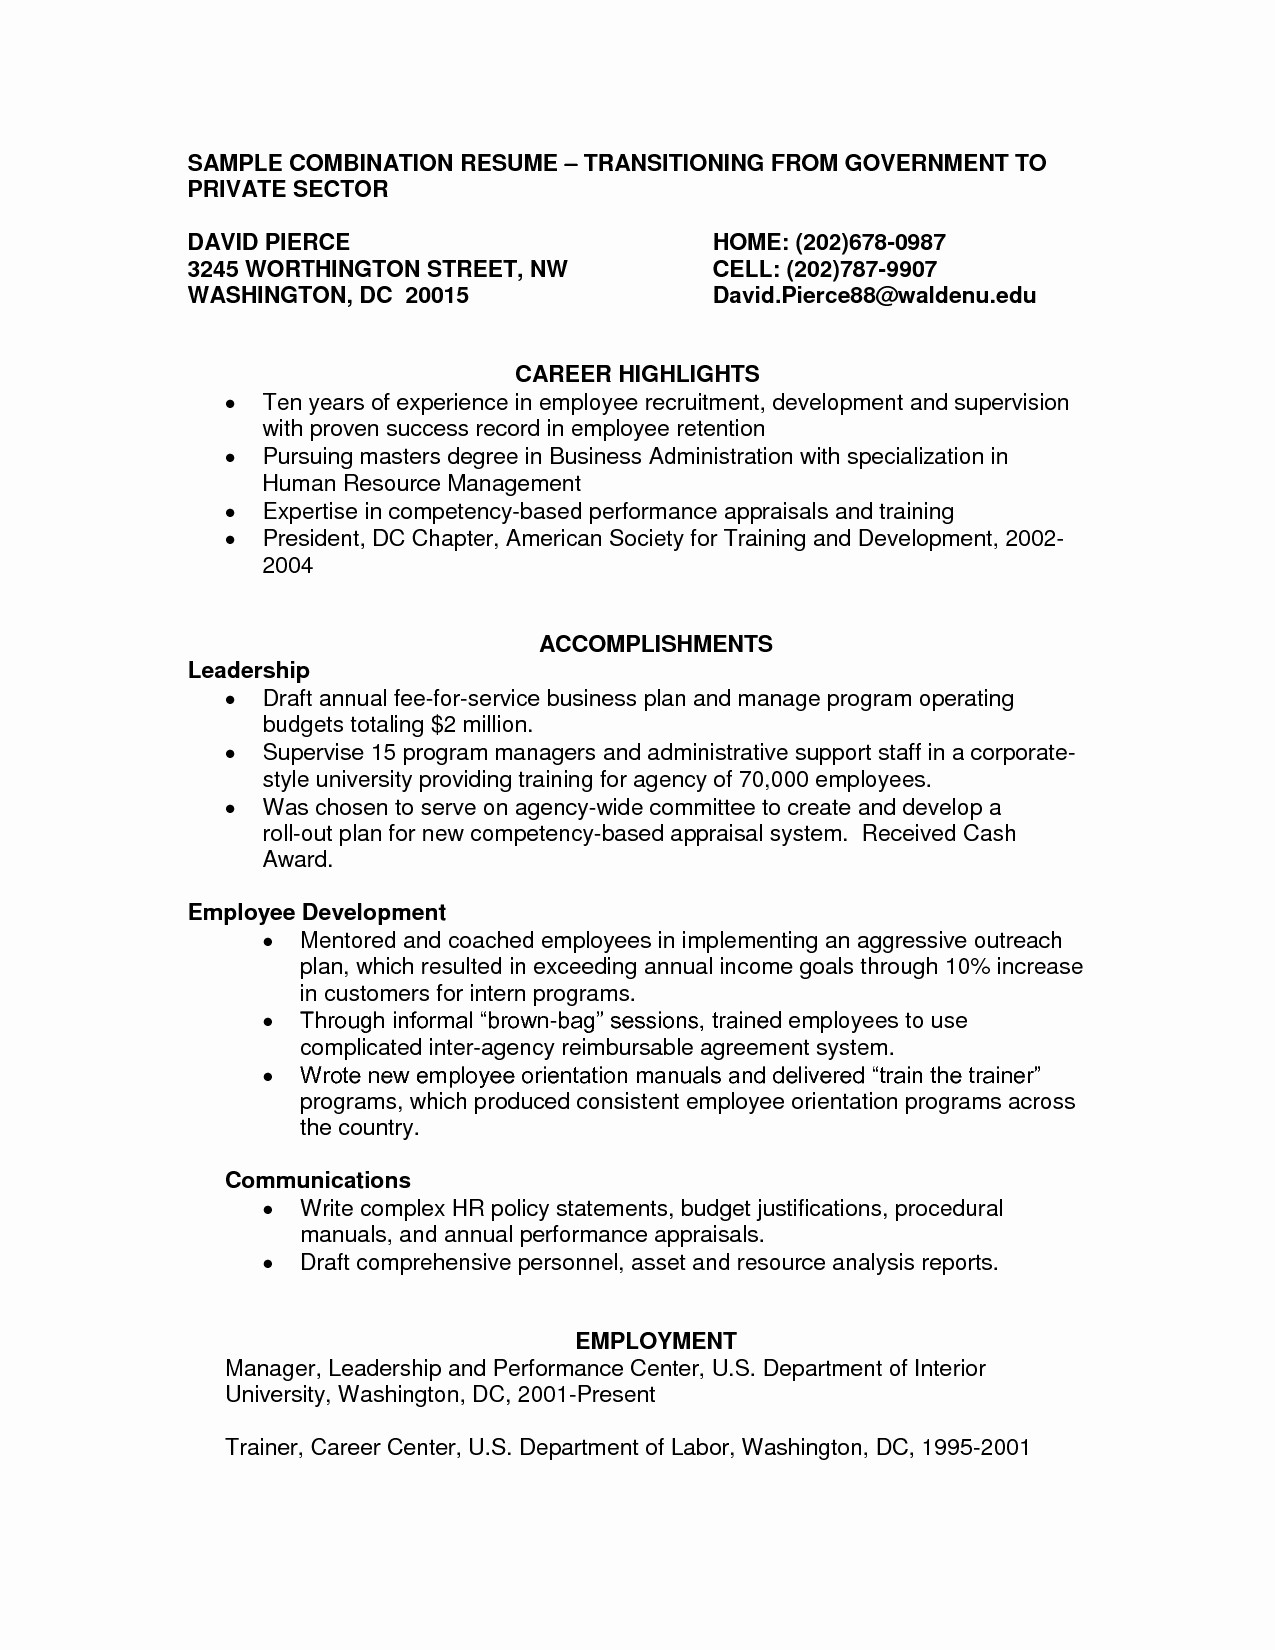 Combined Resume and Cover Letter Awesome Bination Resume Sample Career Change Inspirational Work